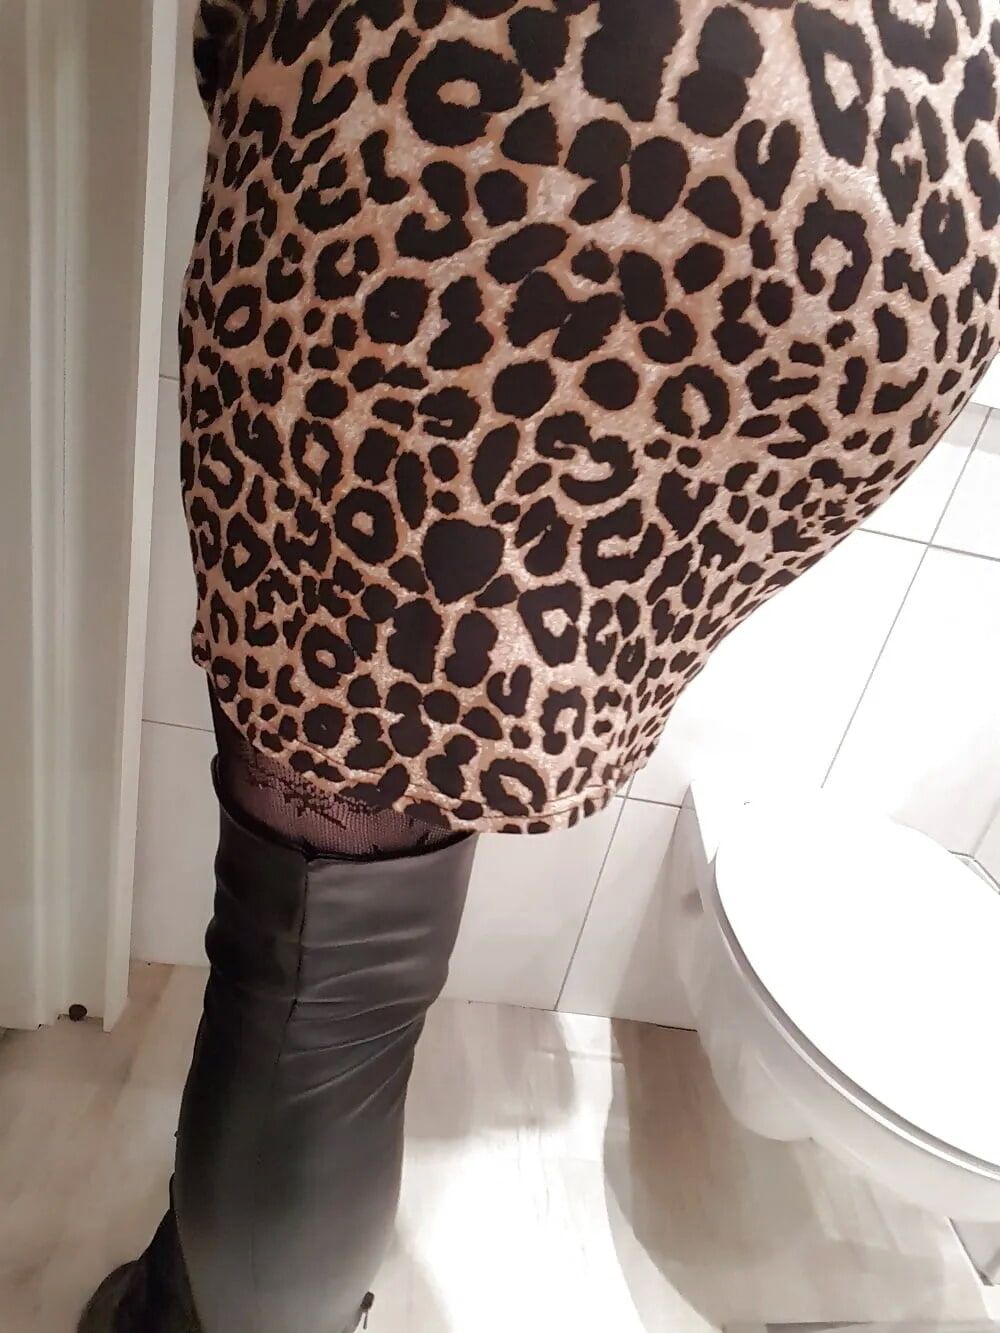 Lepard outfit with black boots and lingerie #7